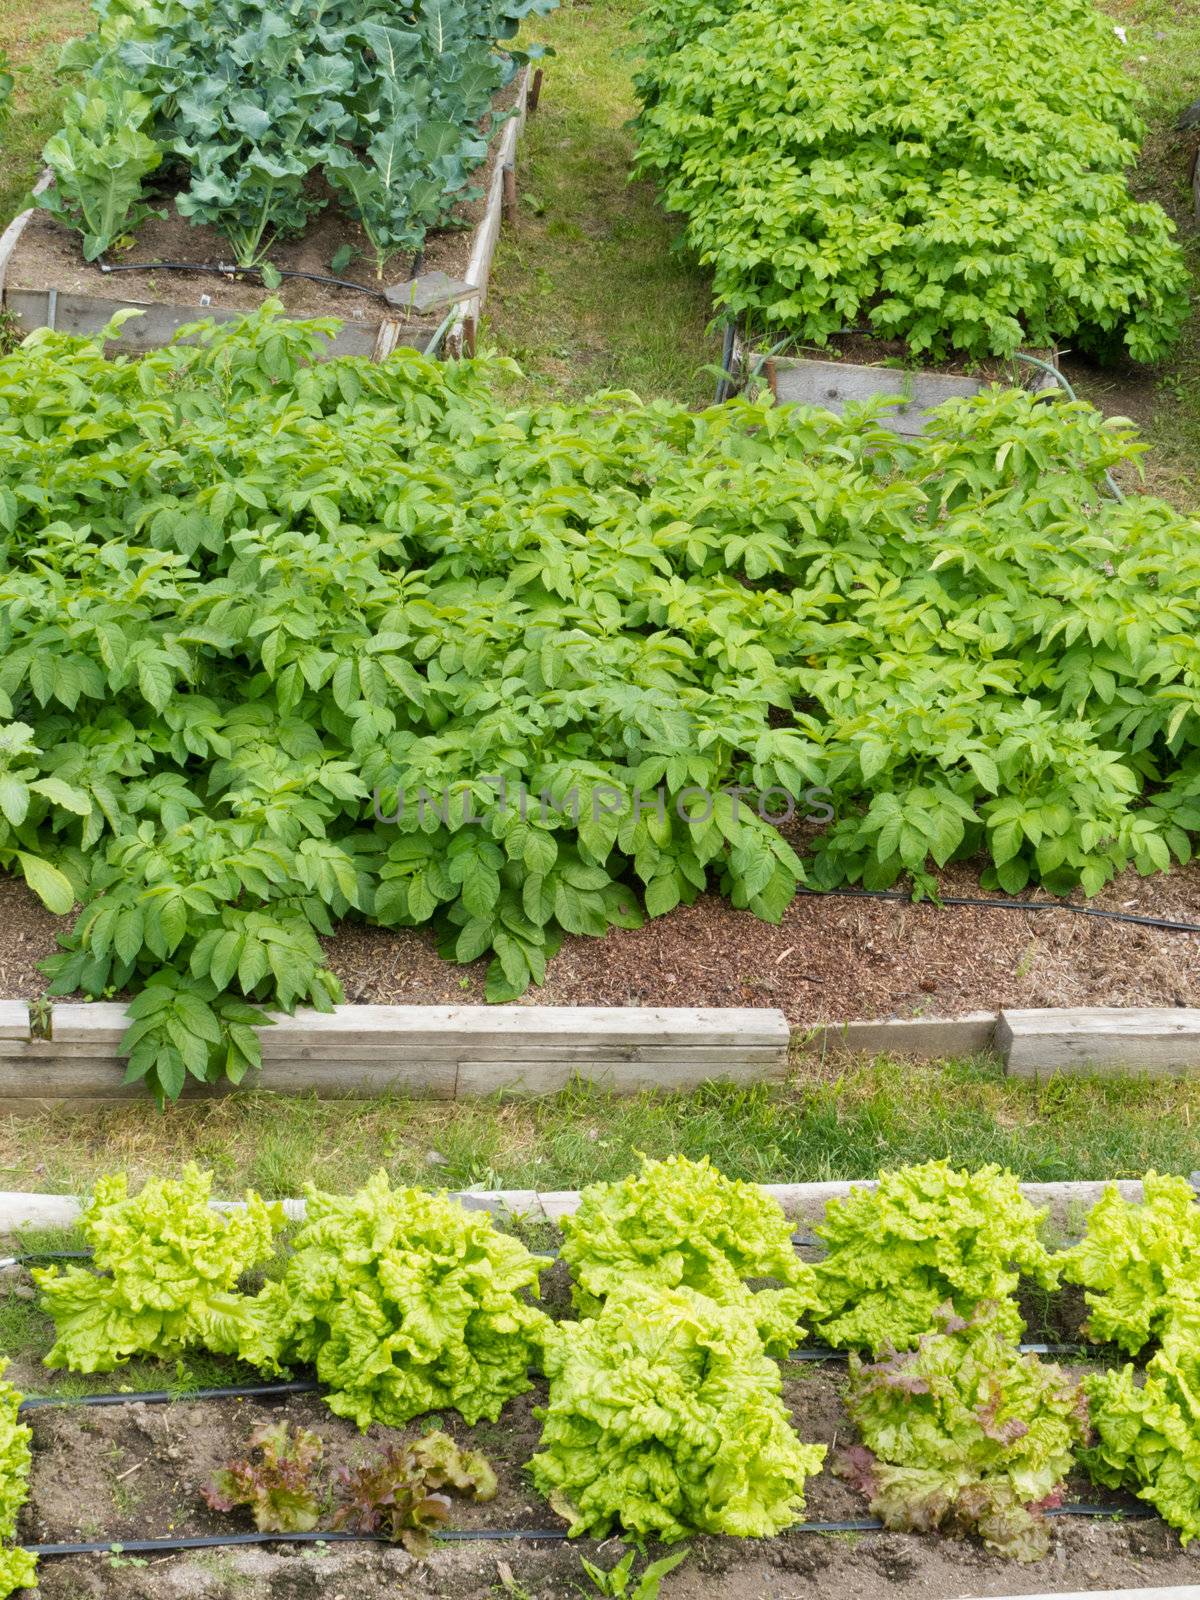 Neat raised beds of potatoes cauliflower broccoli and lettuce as assortment of different home grown fresh vegetable plants in wooden frames for easy cultivation